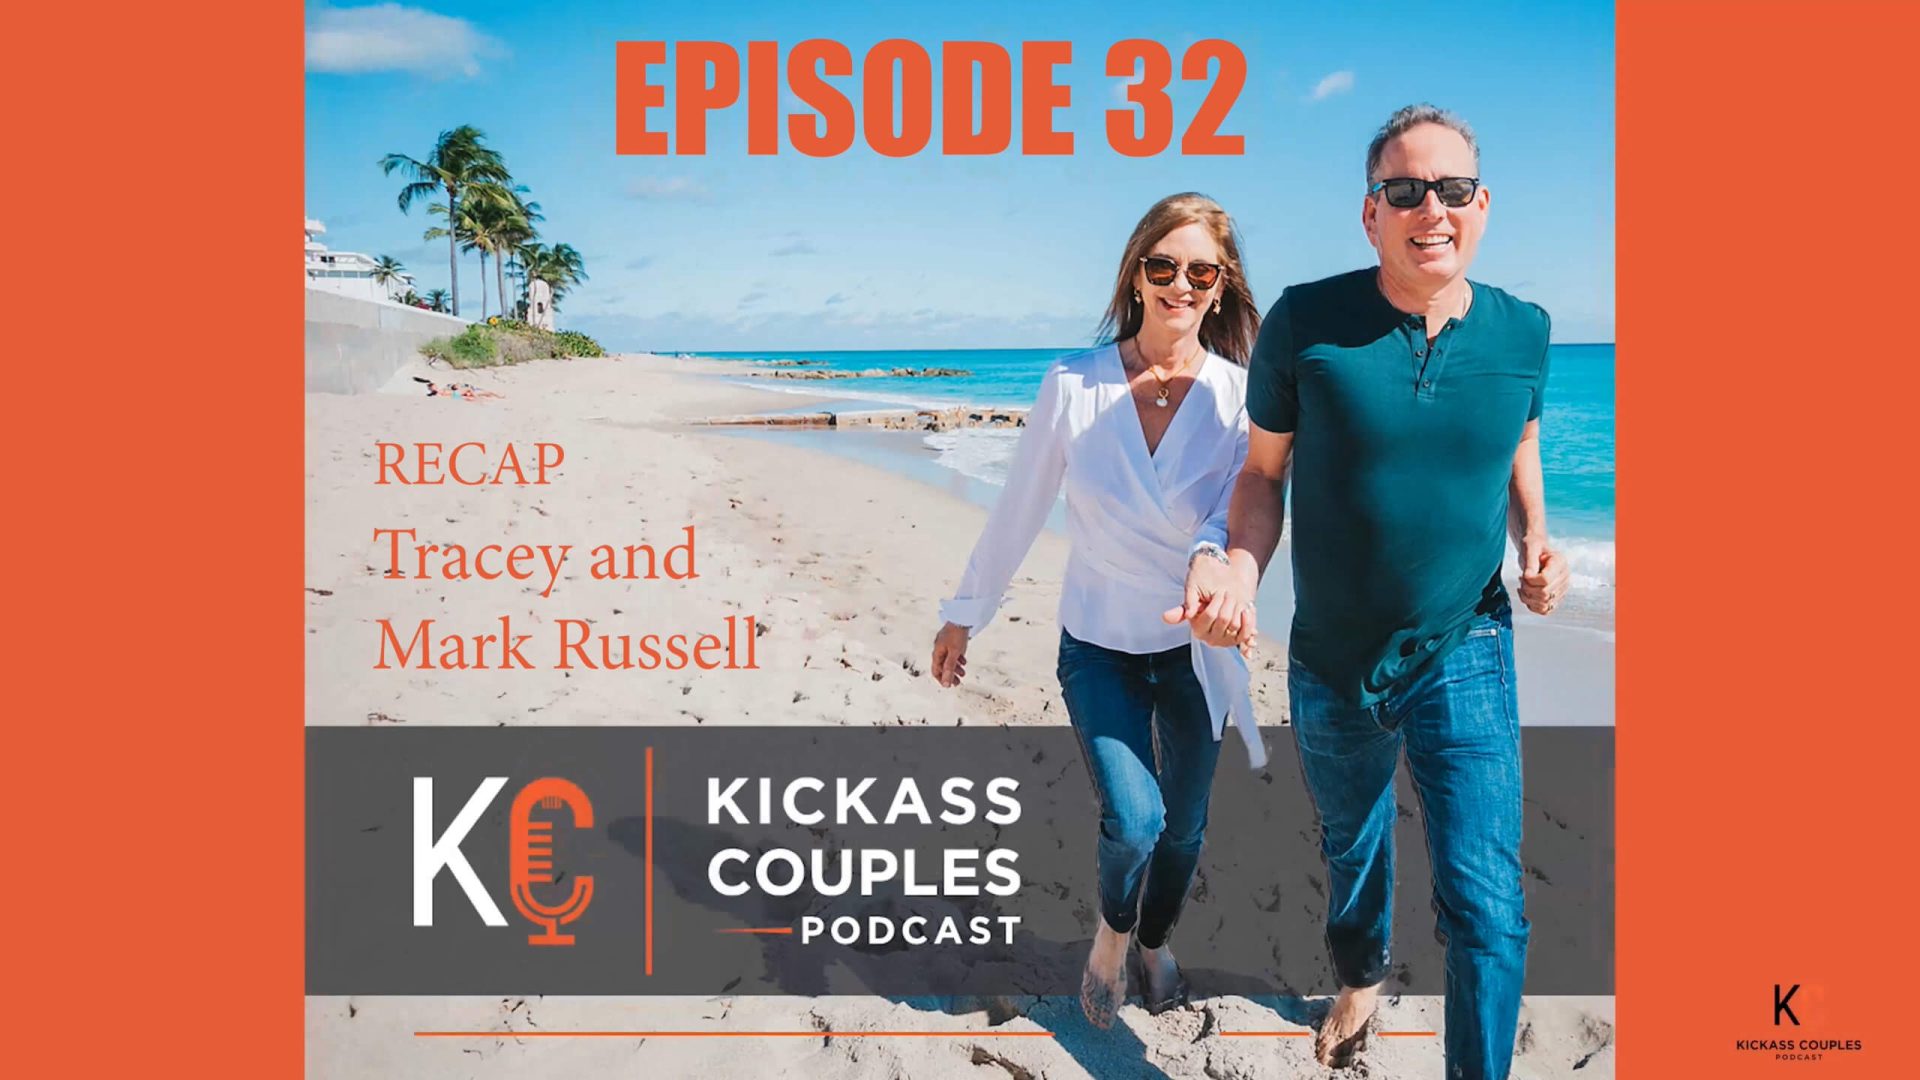 Episode 32 Recap: Tracey and Mark Russell